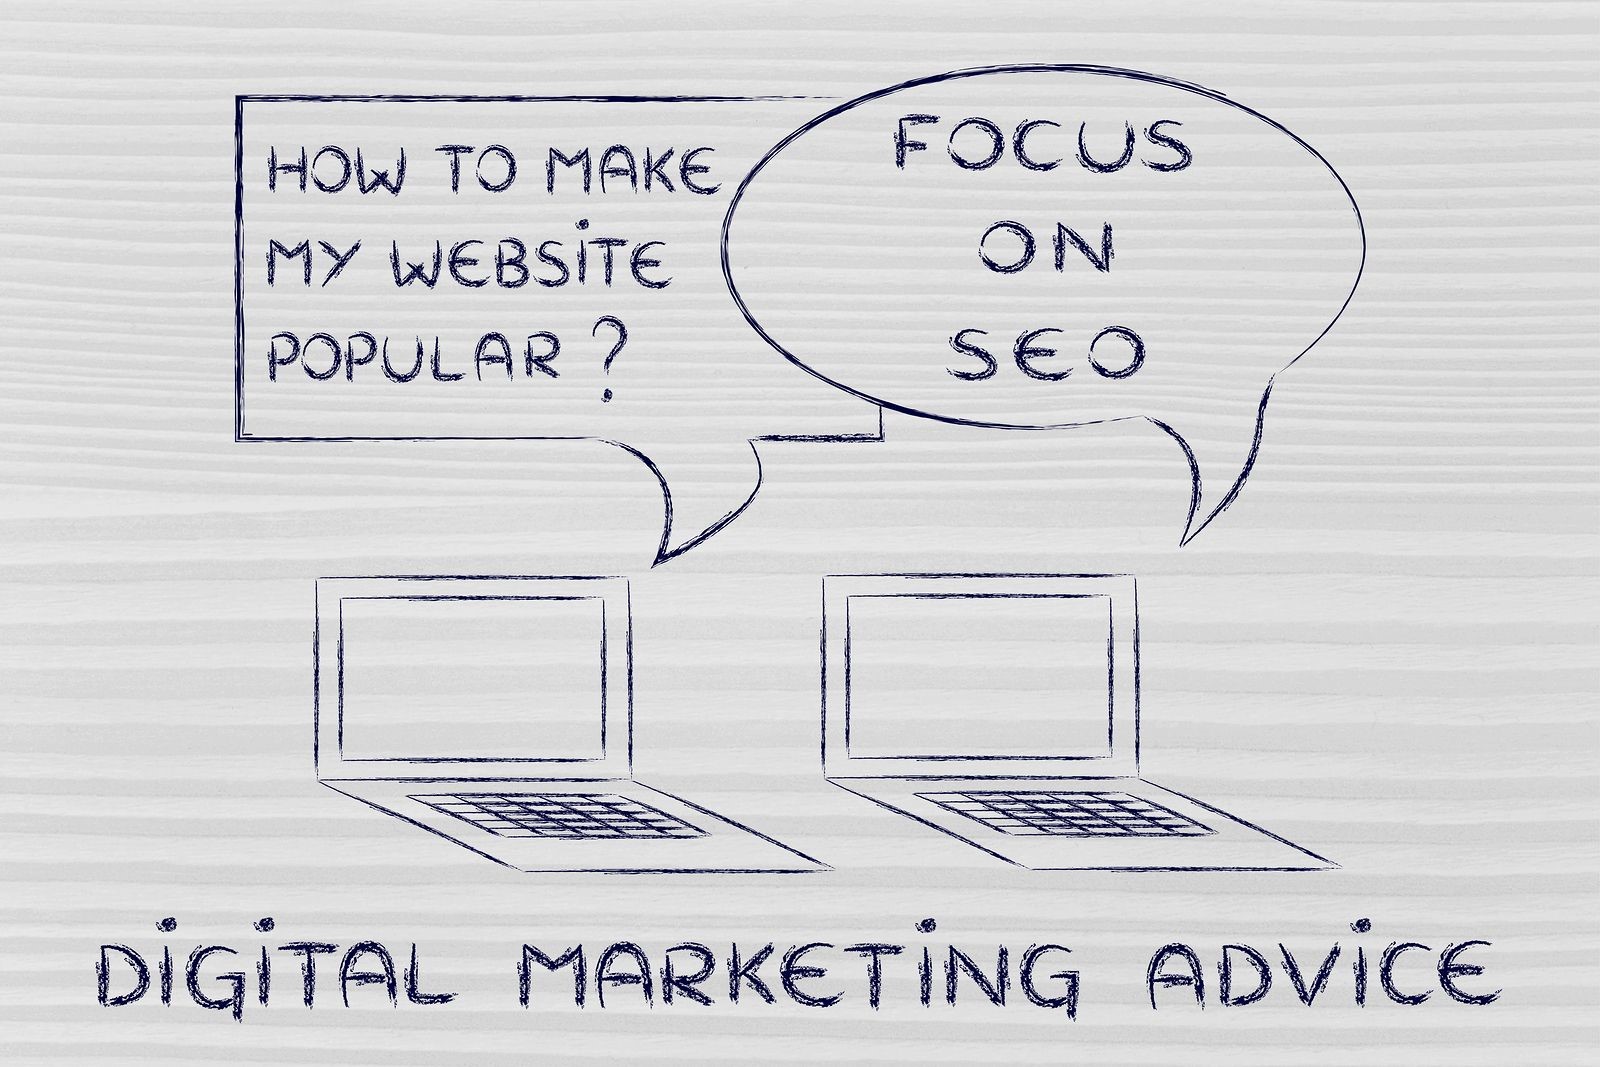 Some SEO Tips from the Pros Can Help Businesses Achieve Online Success